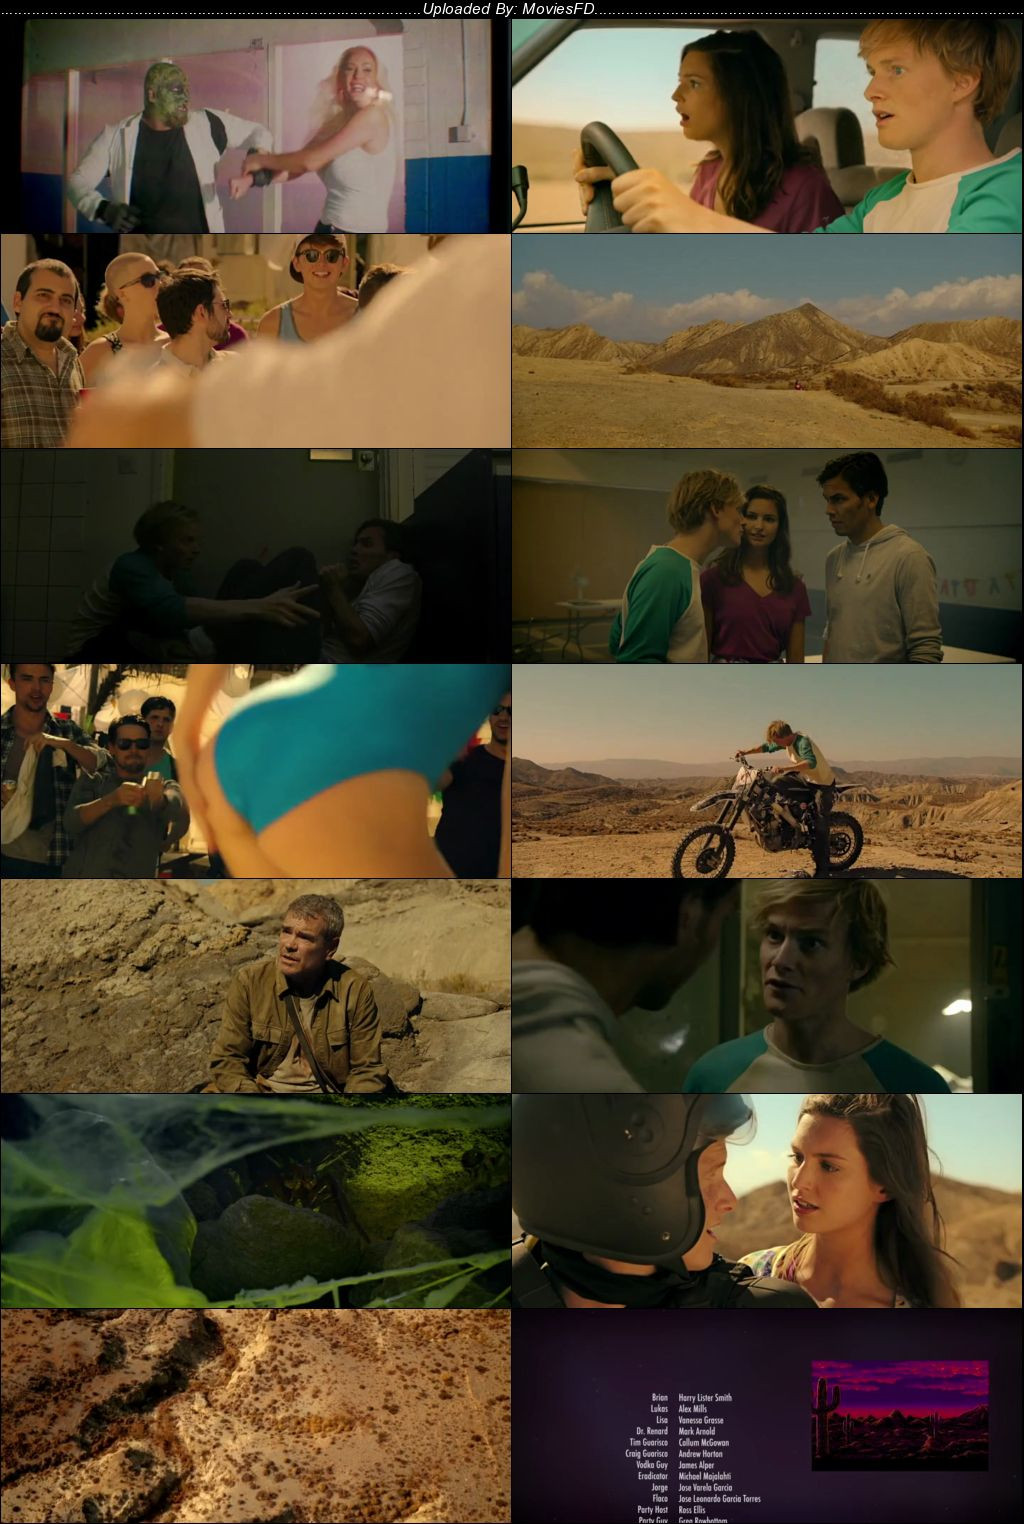 Download It Came from the Desert (2017) BluRay [Hindi + English] ESub 480p 720p